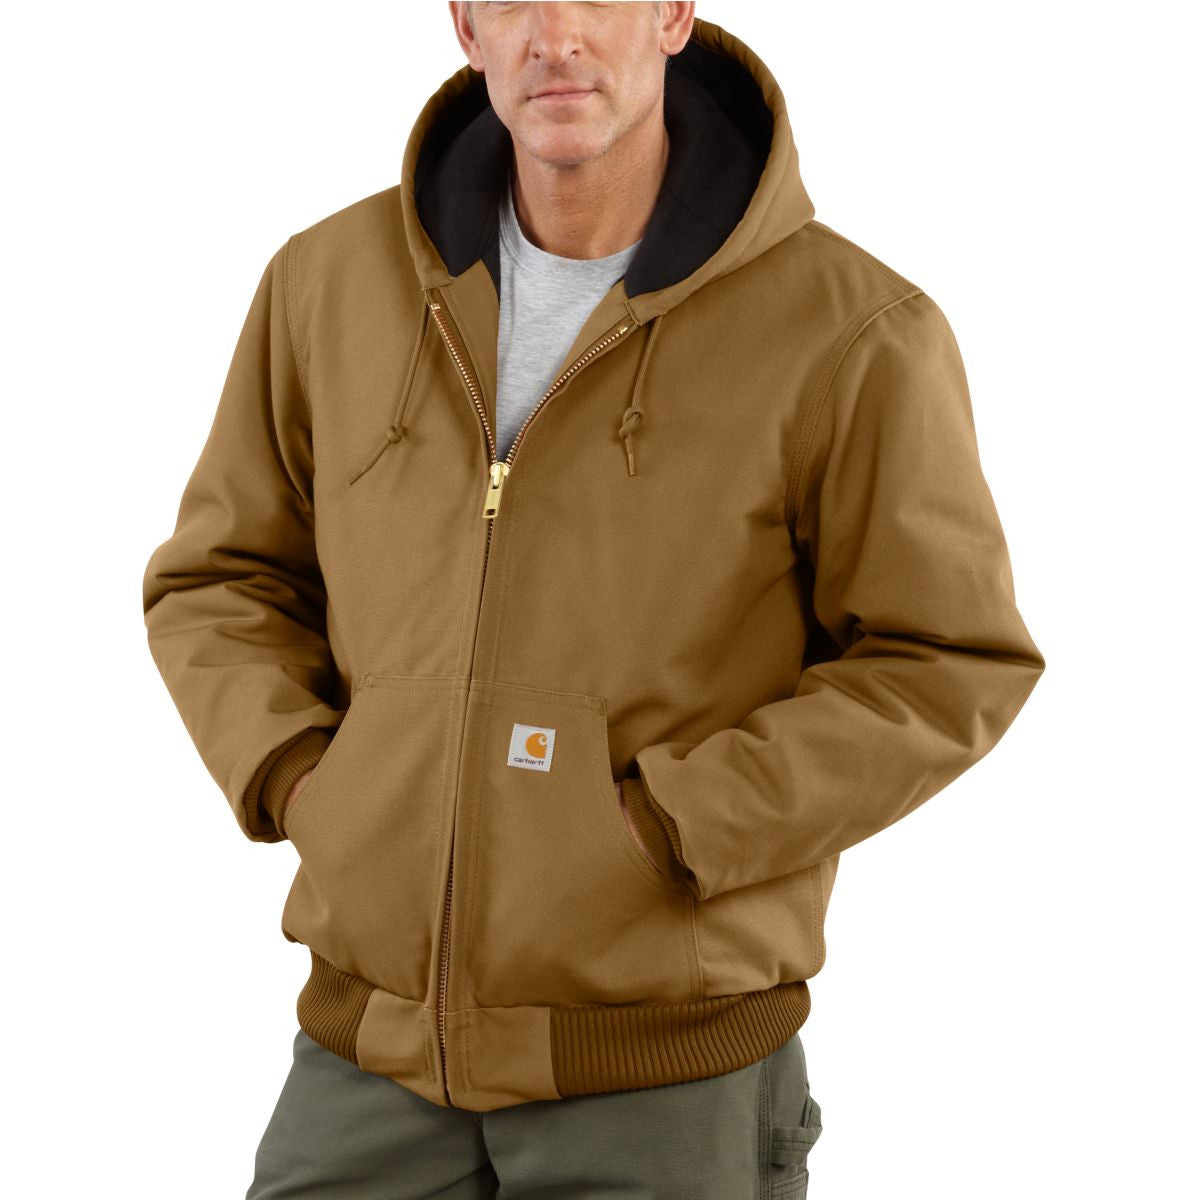 This Is the Only Jacket Guys Needs for Fall